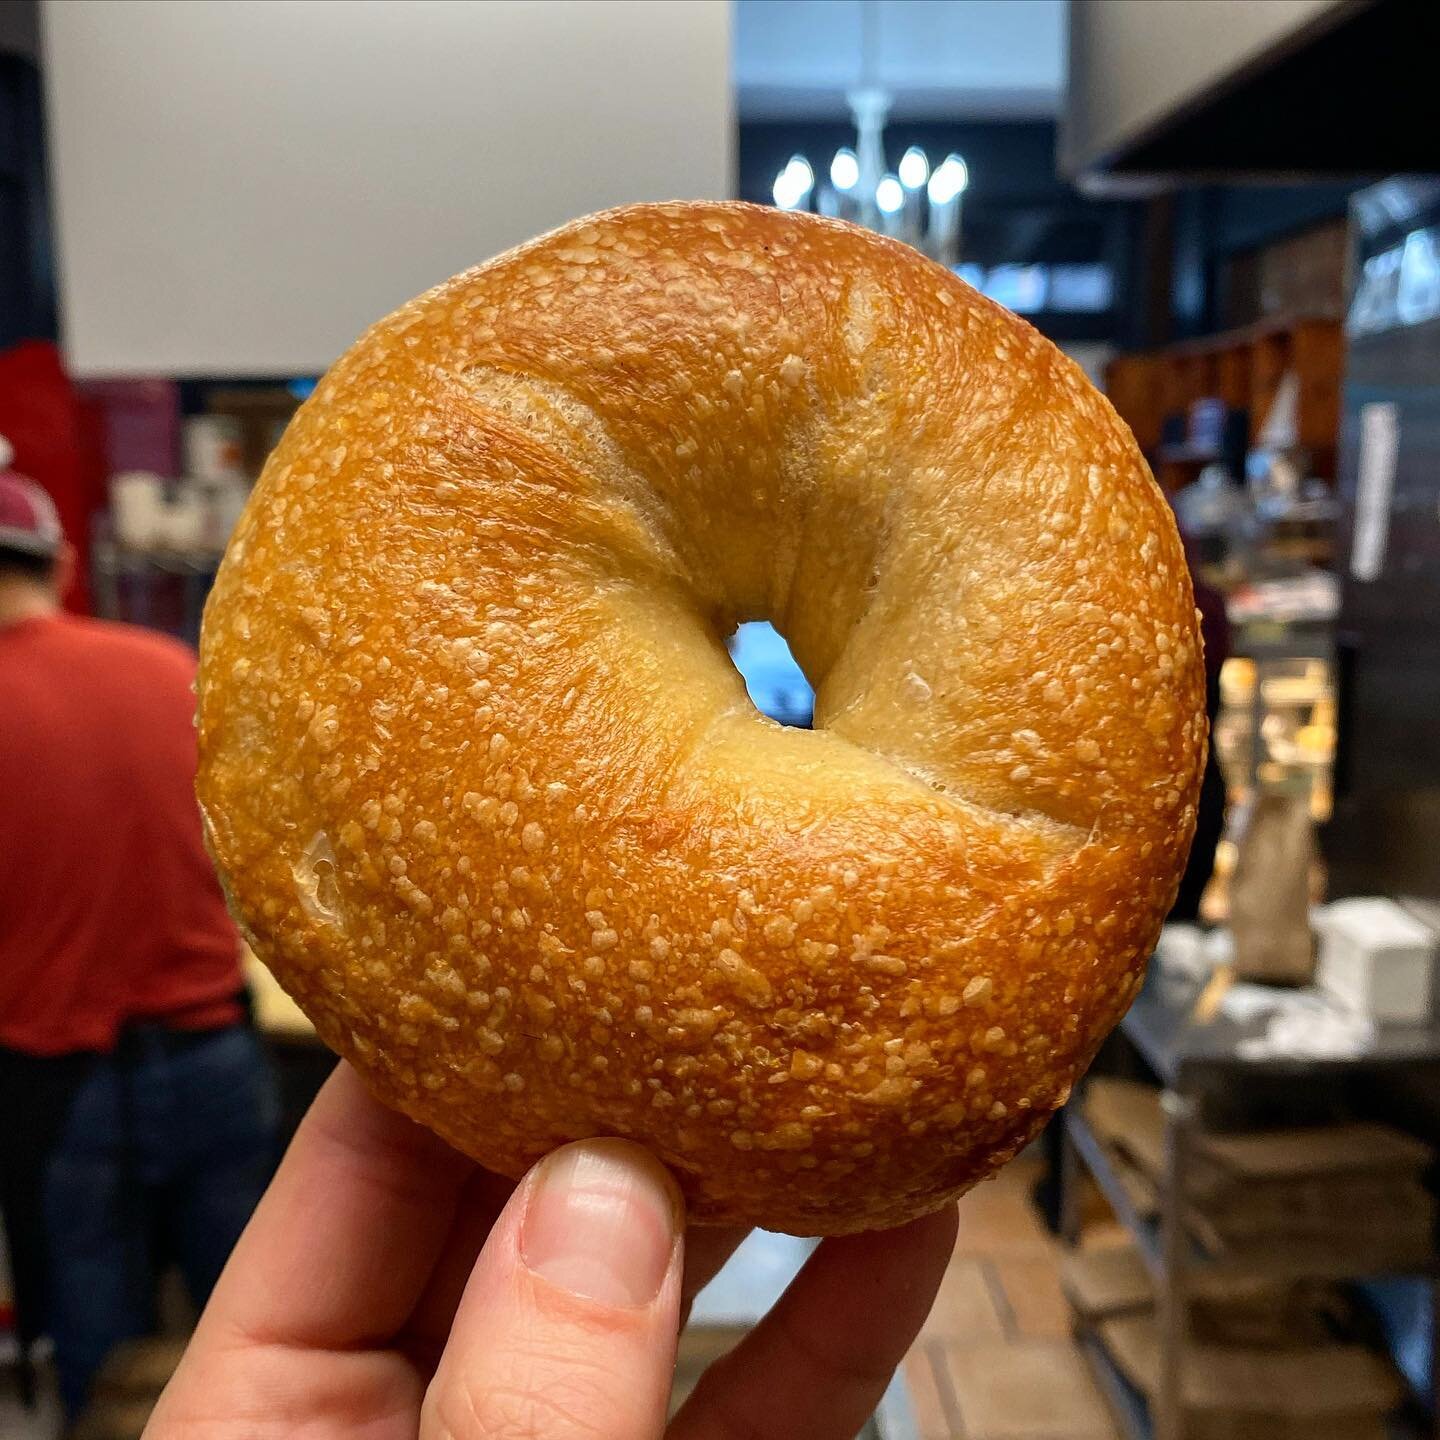 Blistery, crunchy, chewy crust. Soft and fluffy inside. Our new head baker Trevor has mastered the consistency and is producing beautiful bagels every day. 

All this one needs is a nice healthy schmear of scallion cream cheese. Maybe some crispy bac